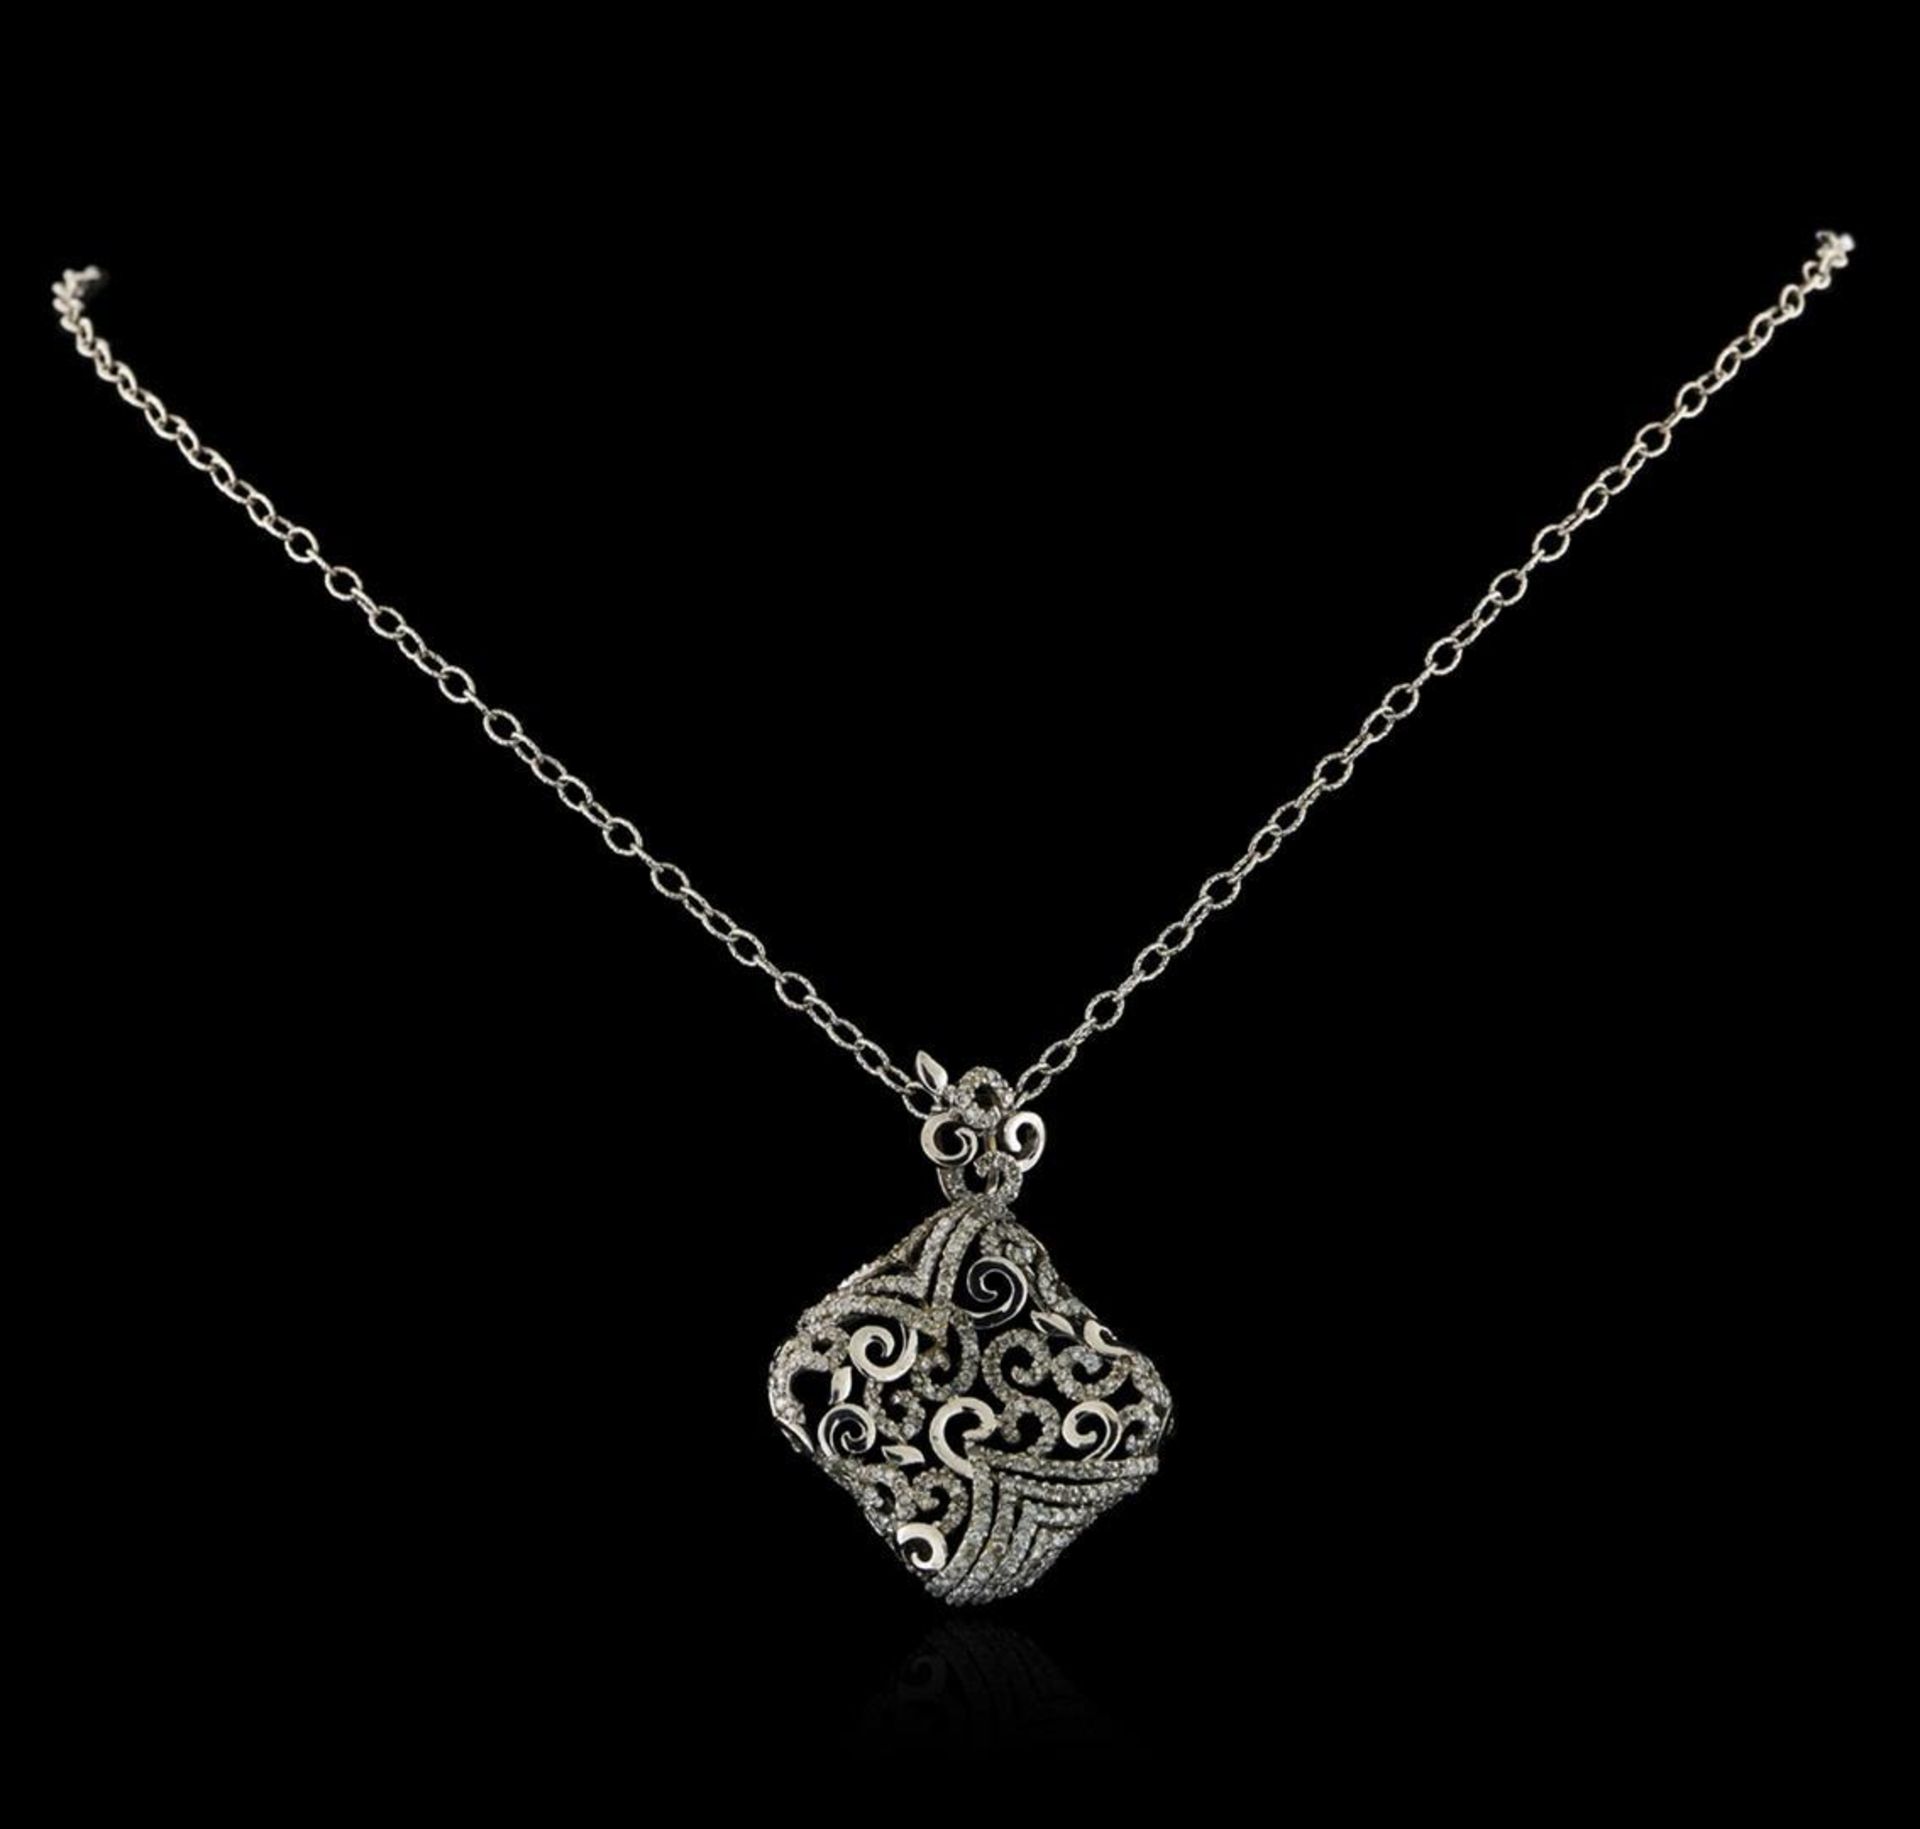 14KT White Gold 1.20 ctw Diamond Pendant With Chain - Image 2 of 3